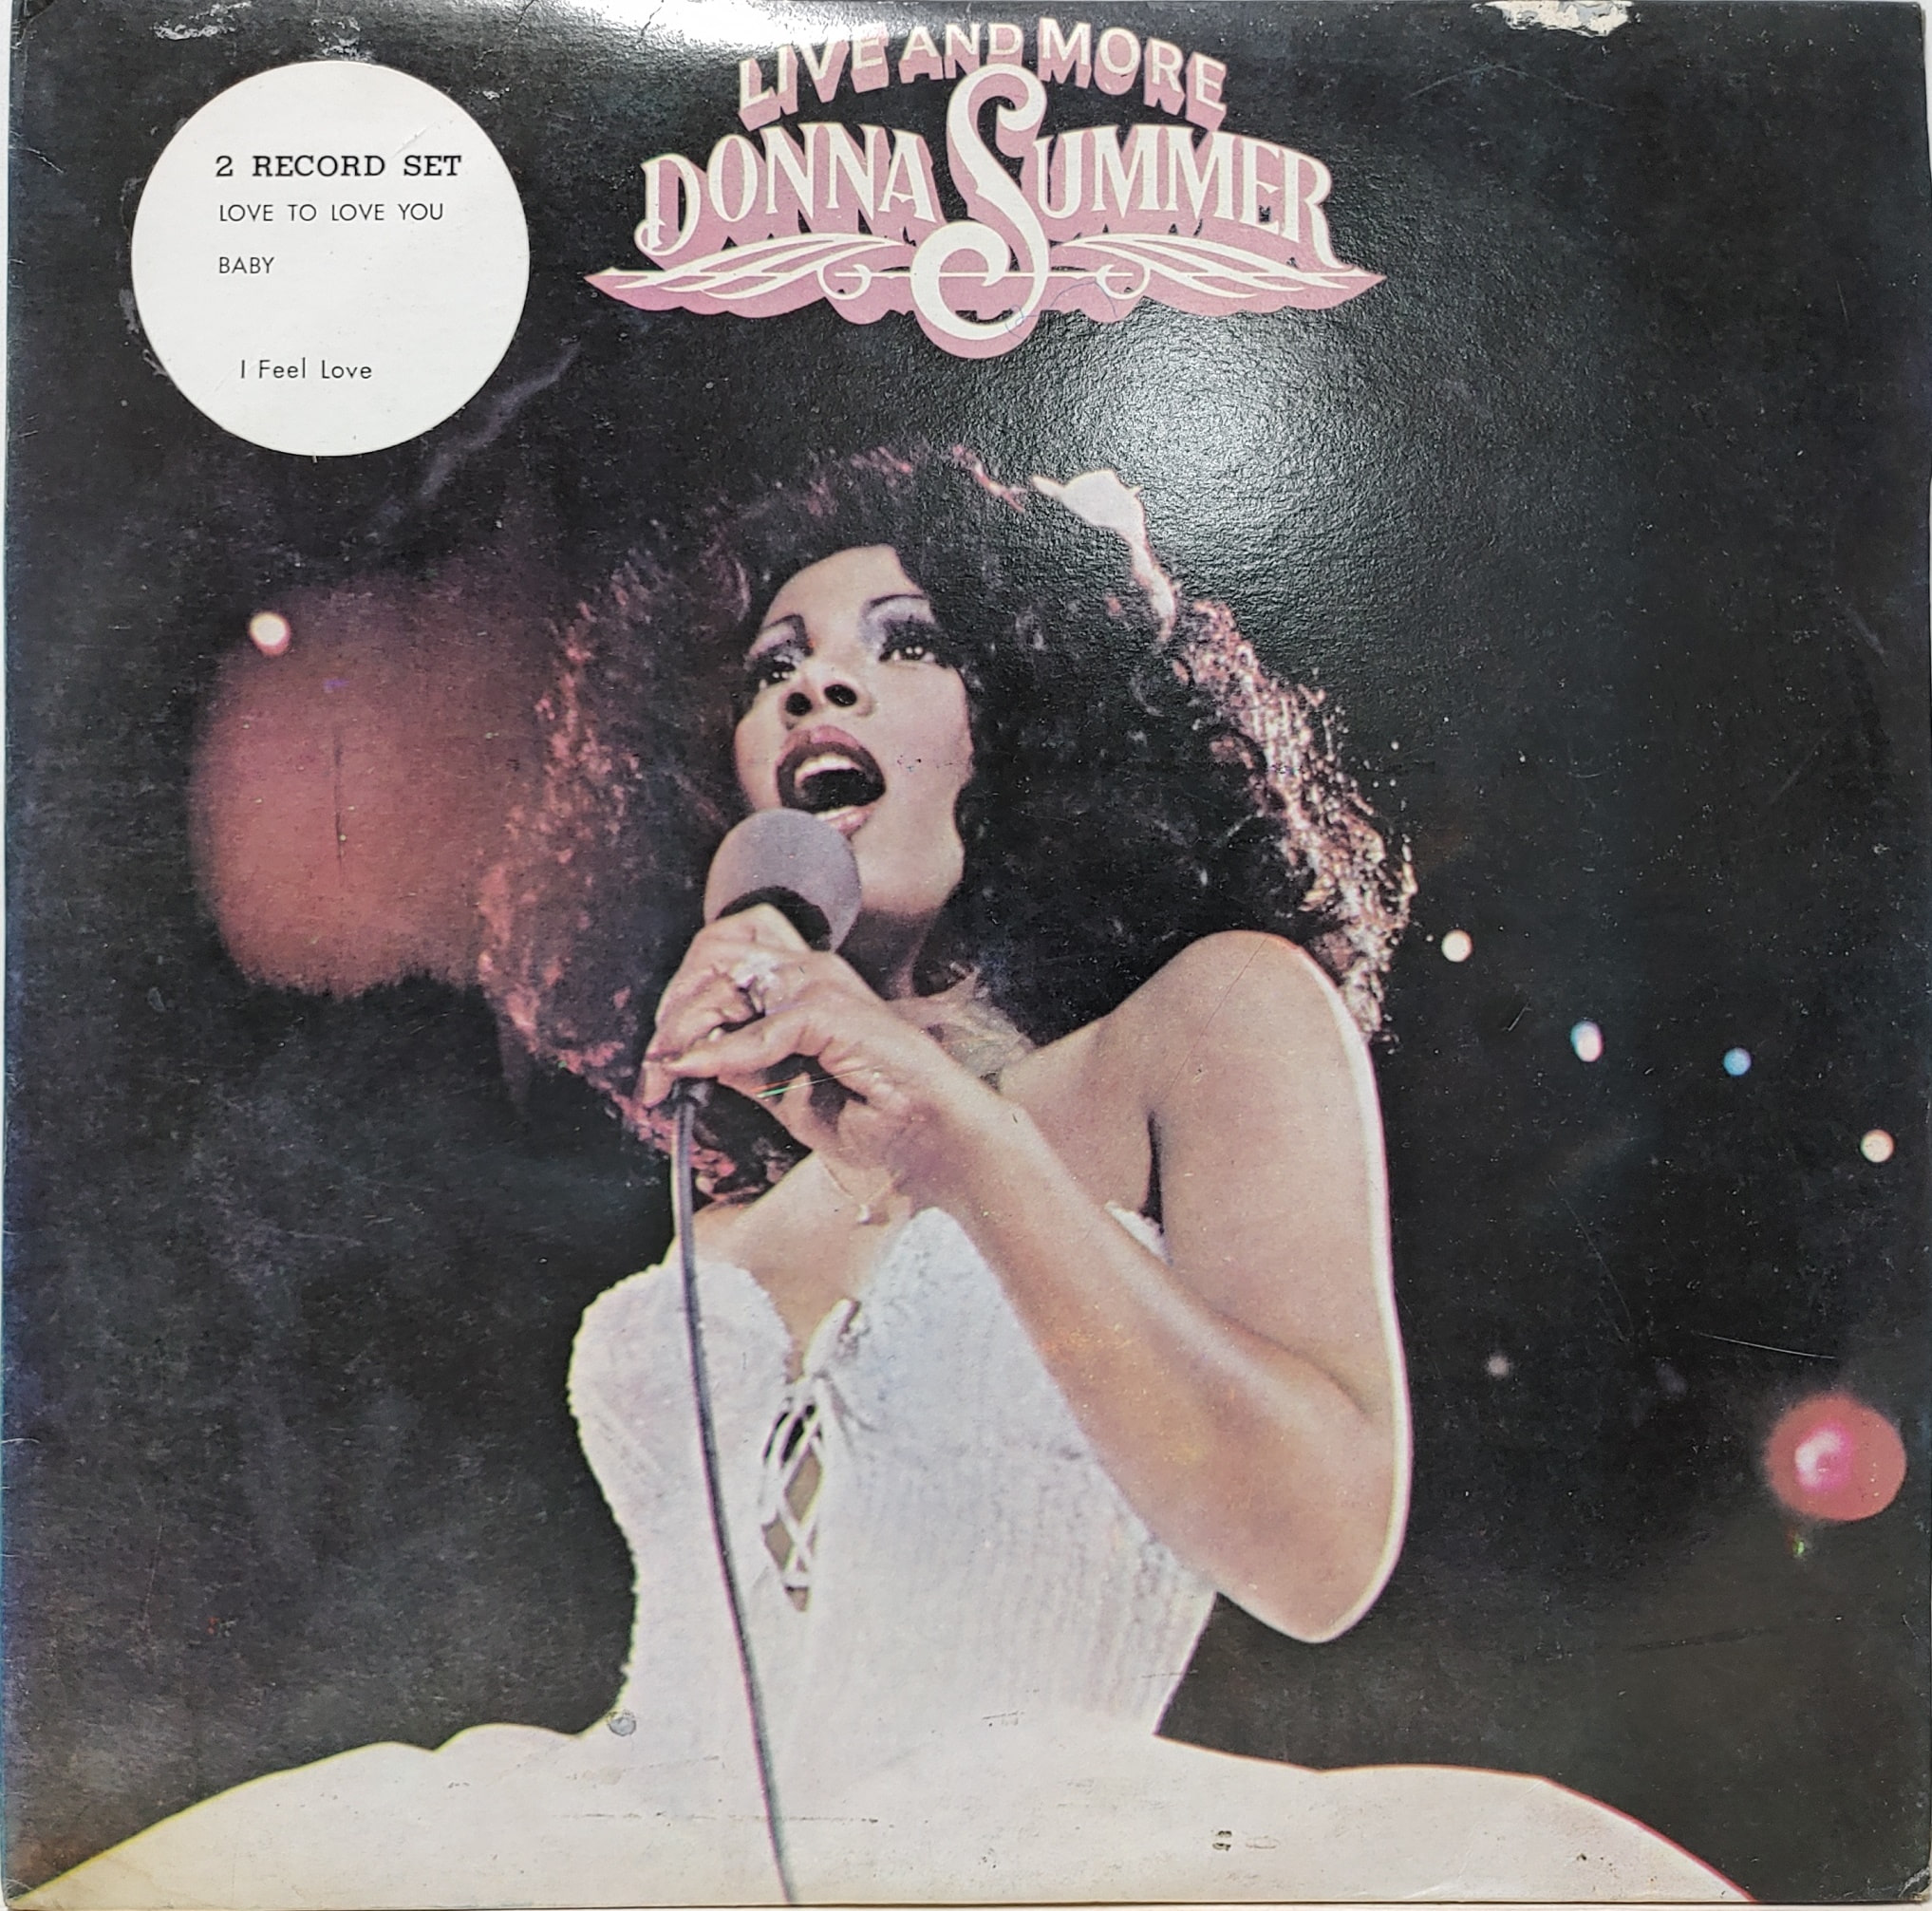 DONNA SUMMER / Live And More 2LP(카피음반)